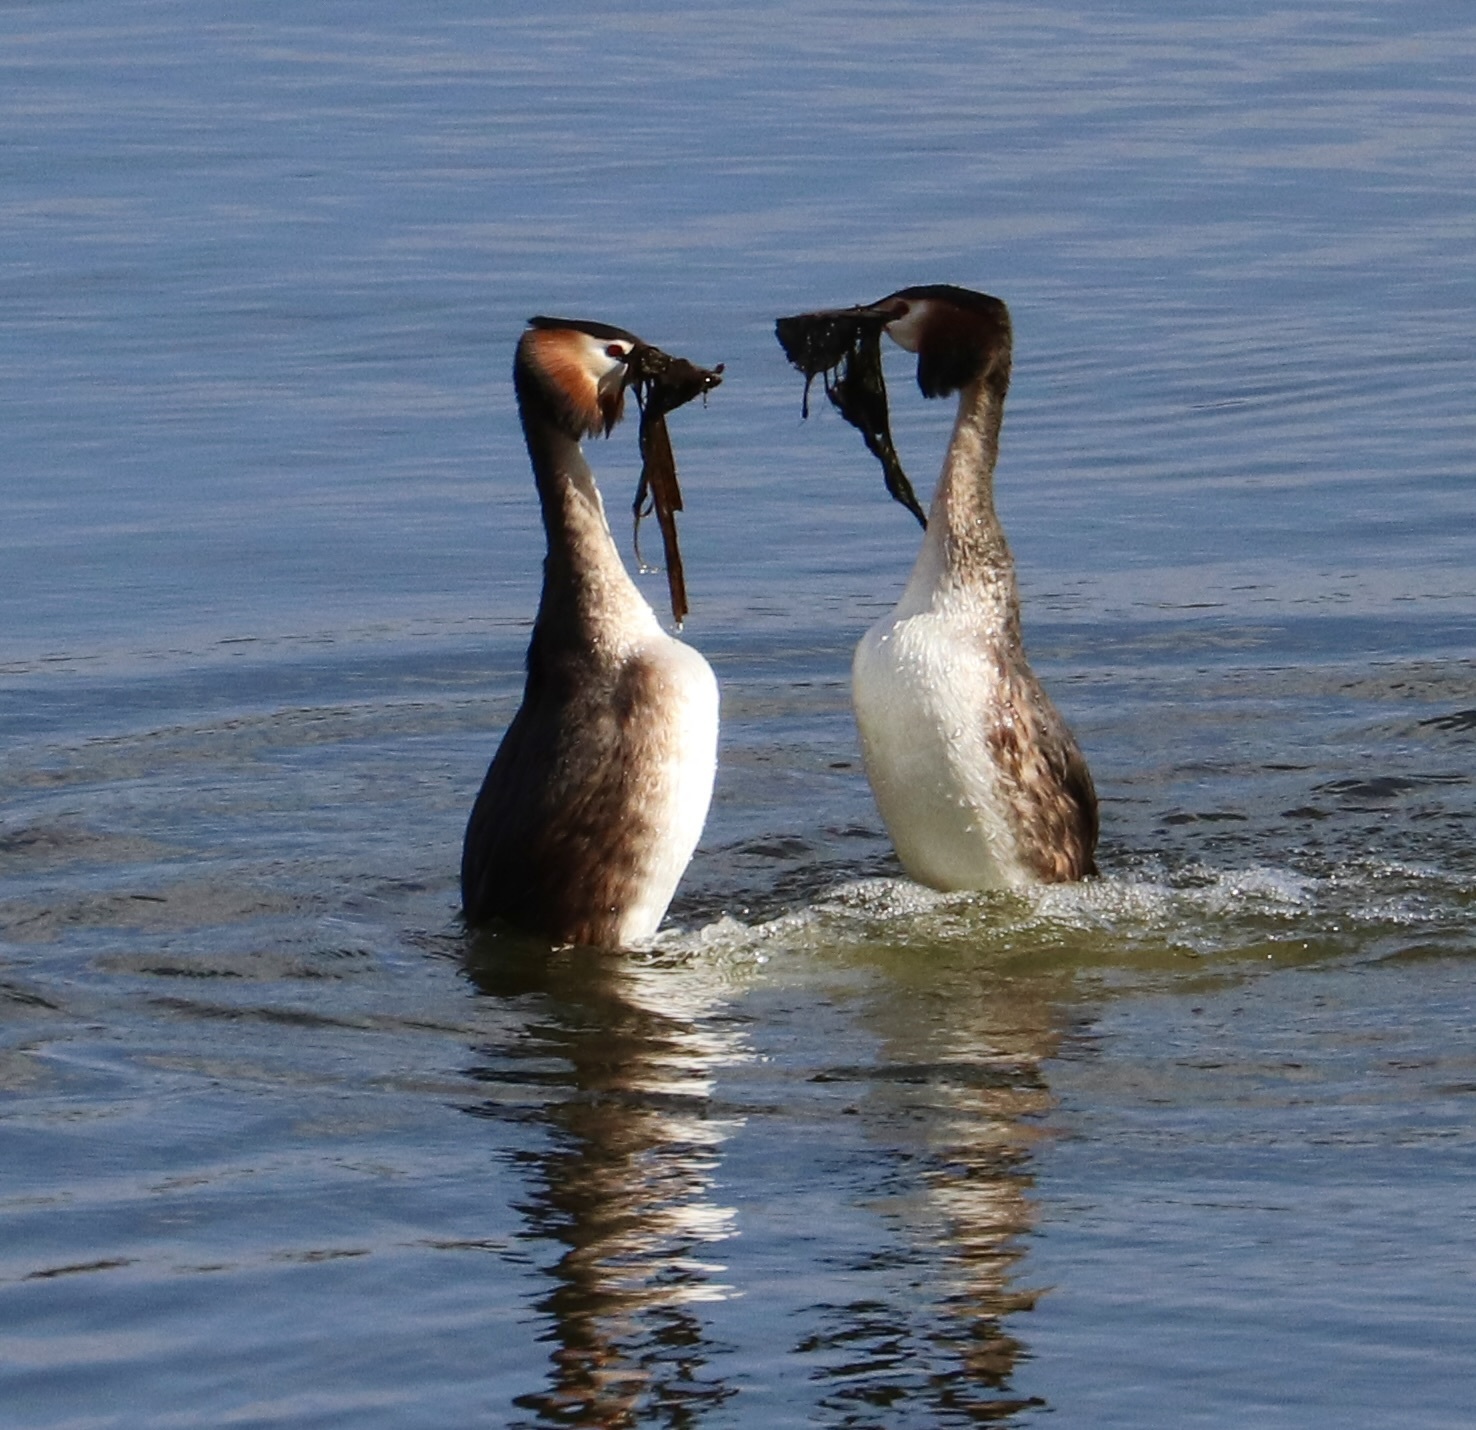 Great crested grebes and their courtship dance at Marbury Mere